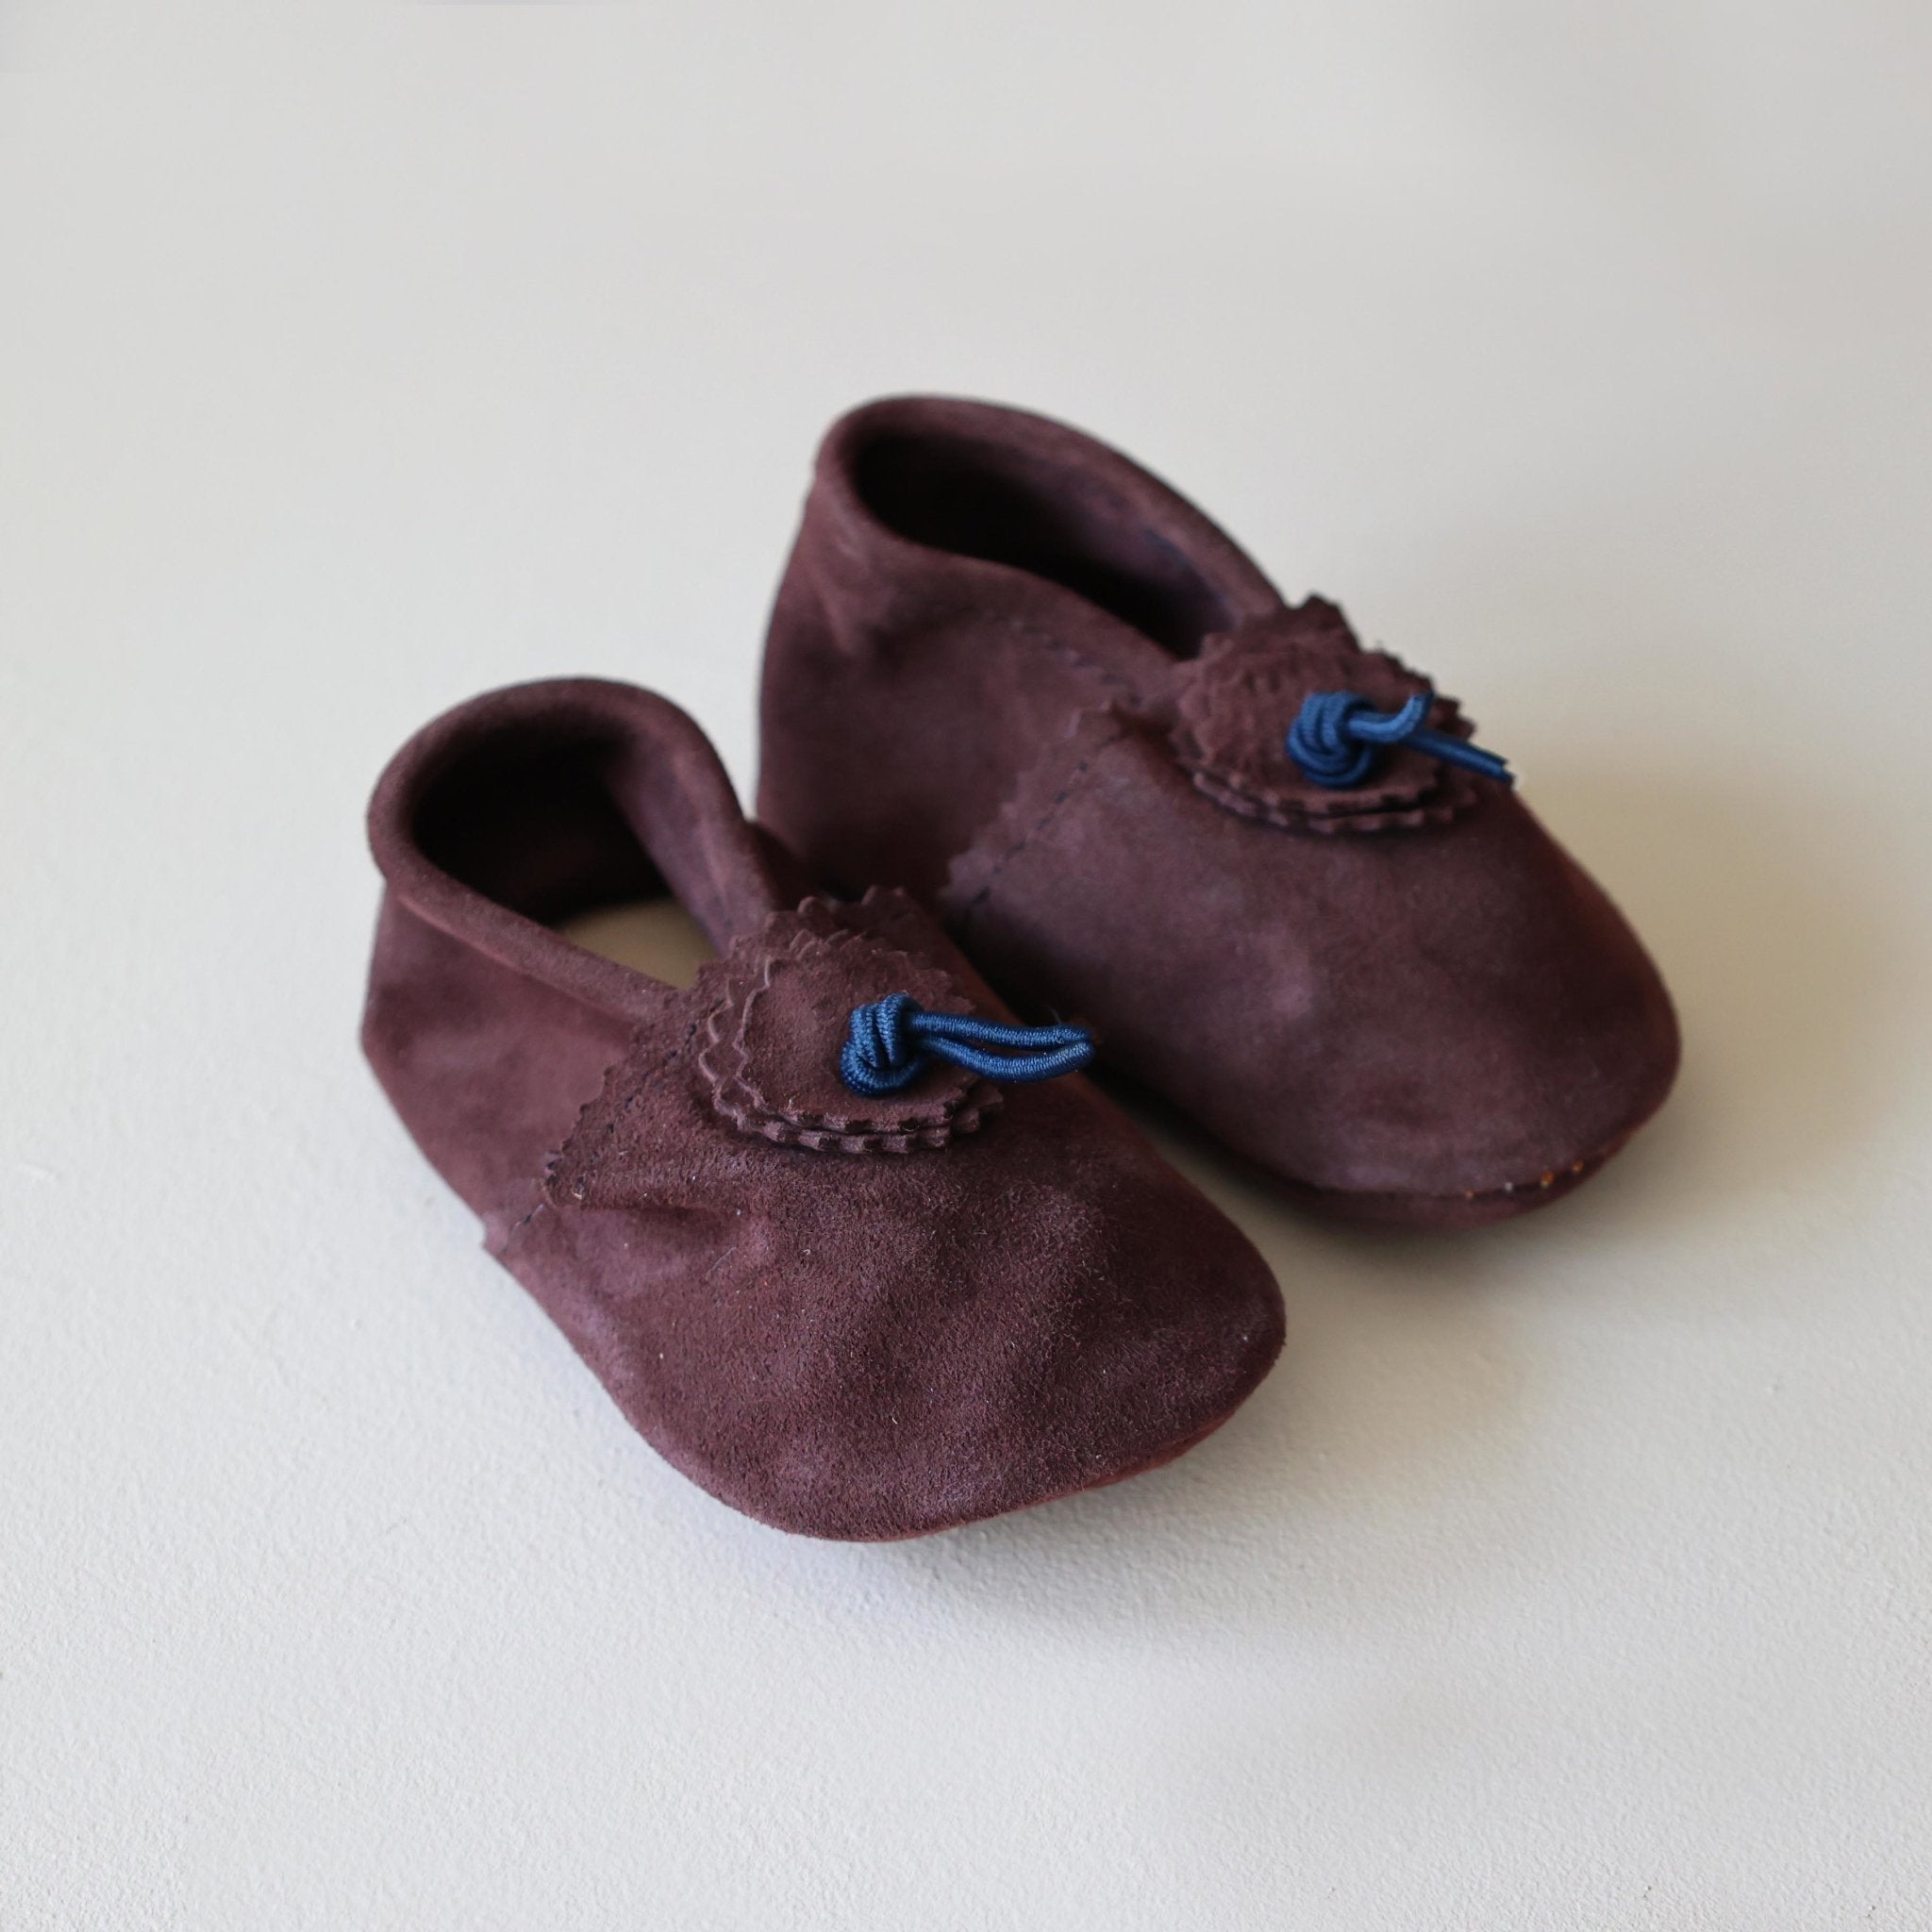 Suede Baby Slippers - Chocolate - Artisan Stories